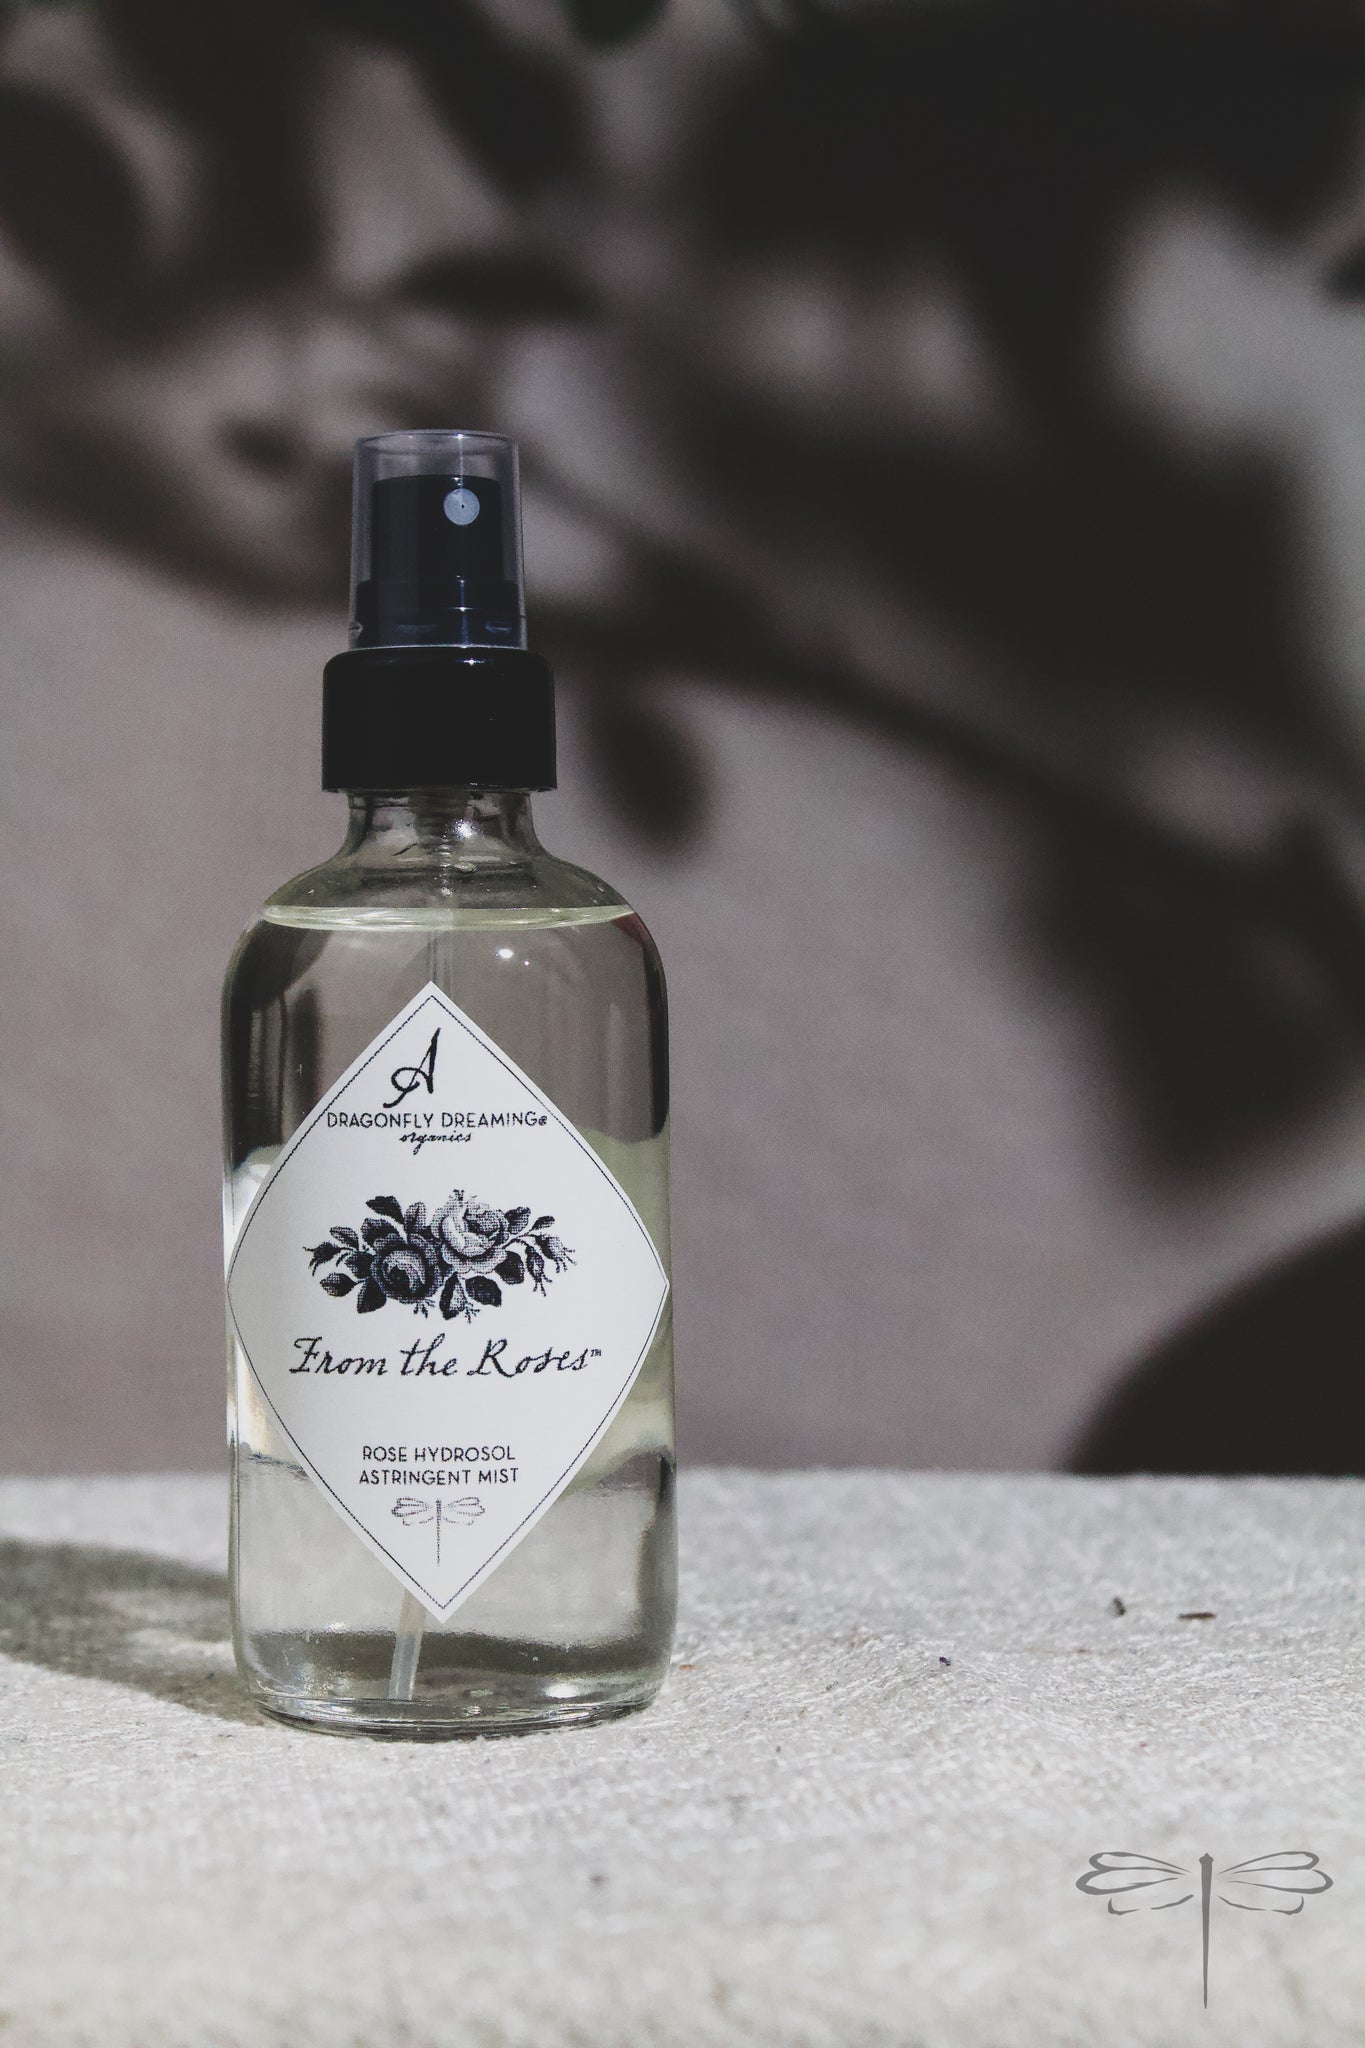 Pictured here, From the Roses Rose Hydrosol Astringent Mist by Dragonfly Dreaming Organics